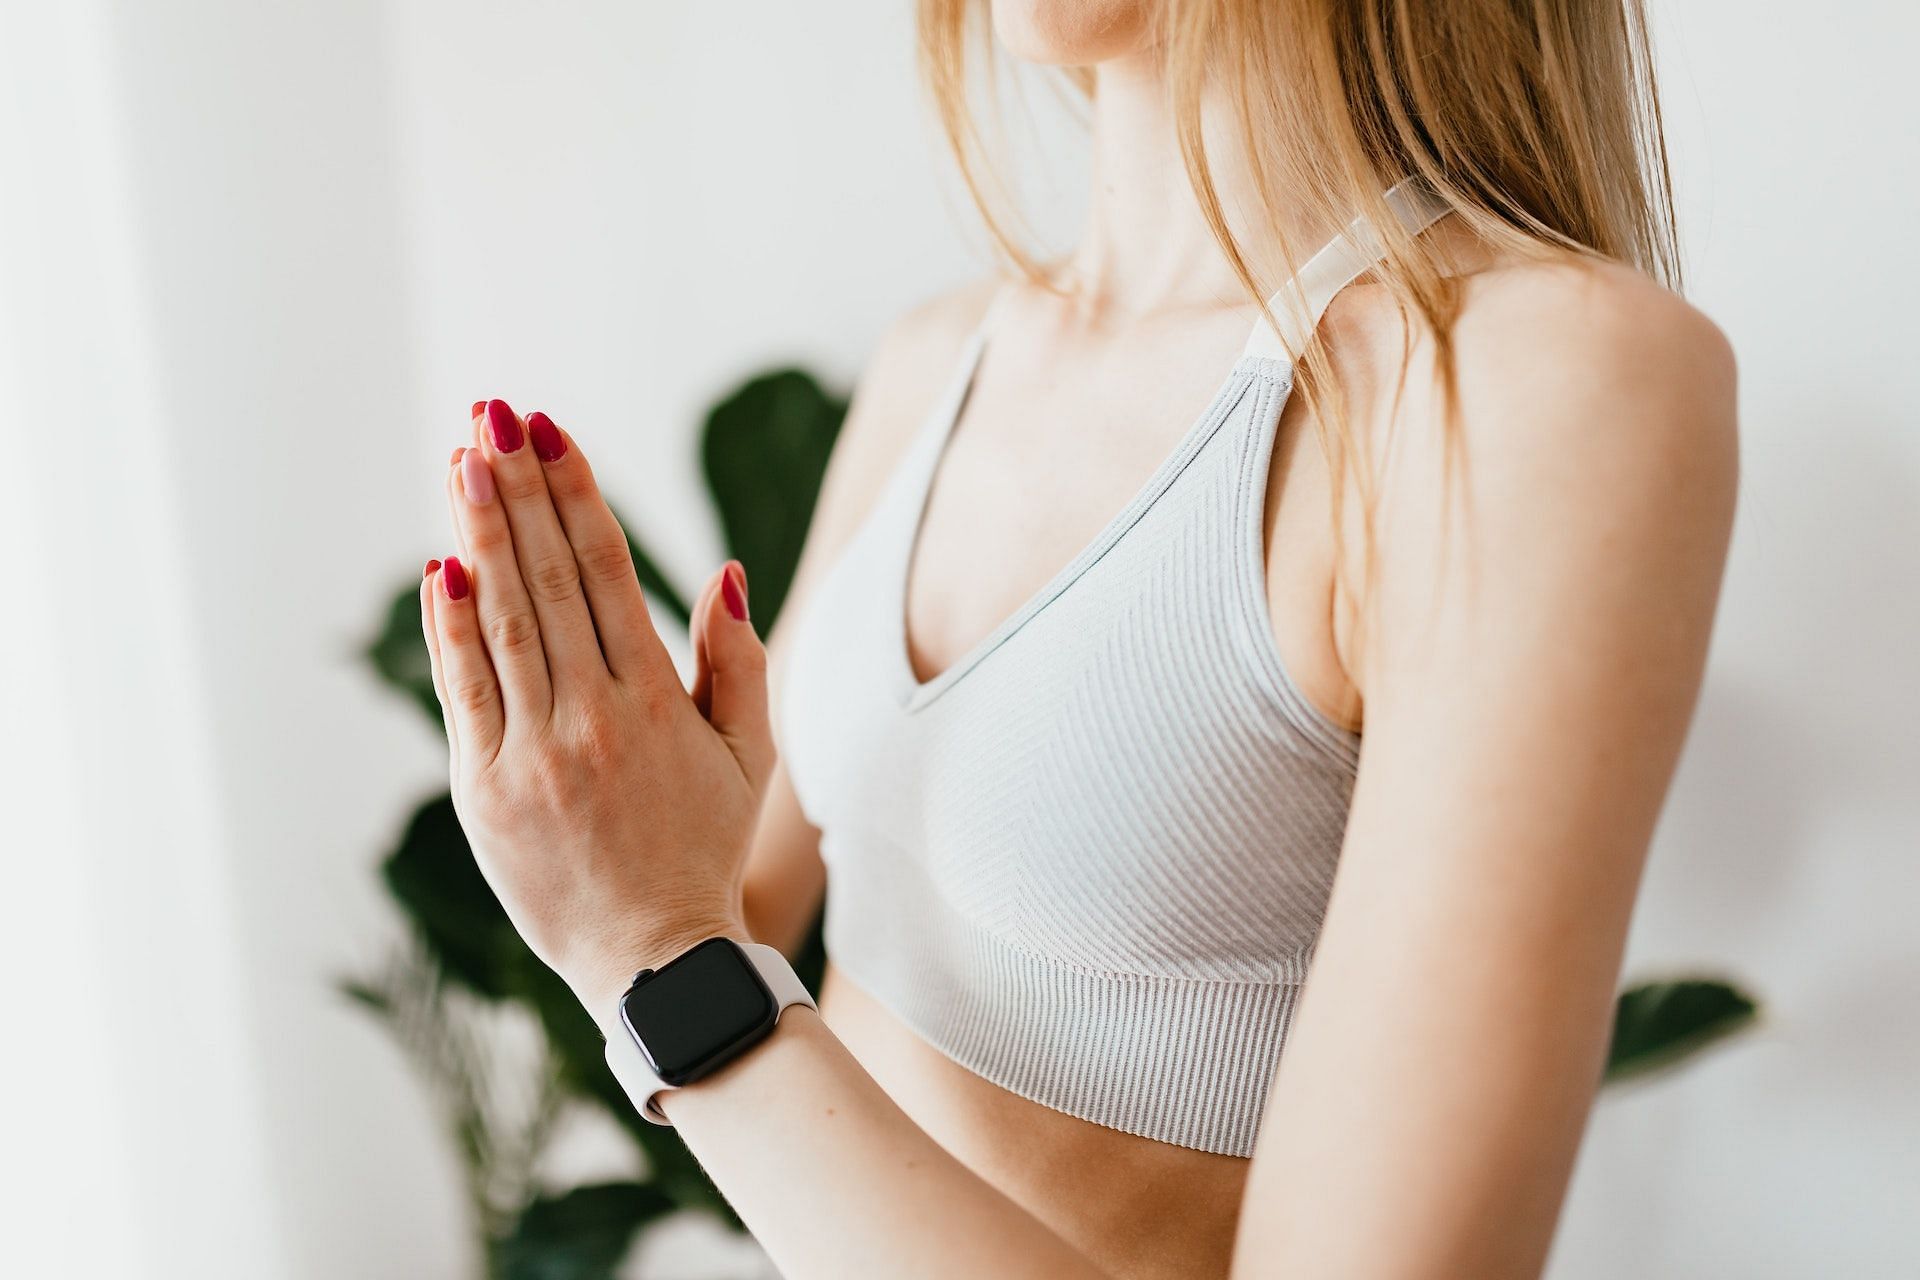 The prayer position stretches the muscles in the forearms and wrists and provides relaxation. (Photo via Pexels/Karolina Grabowska)